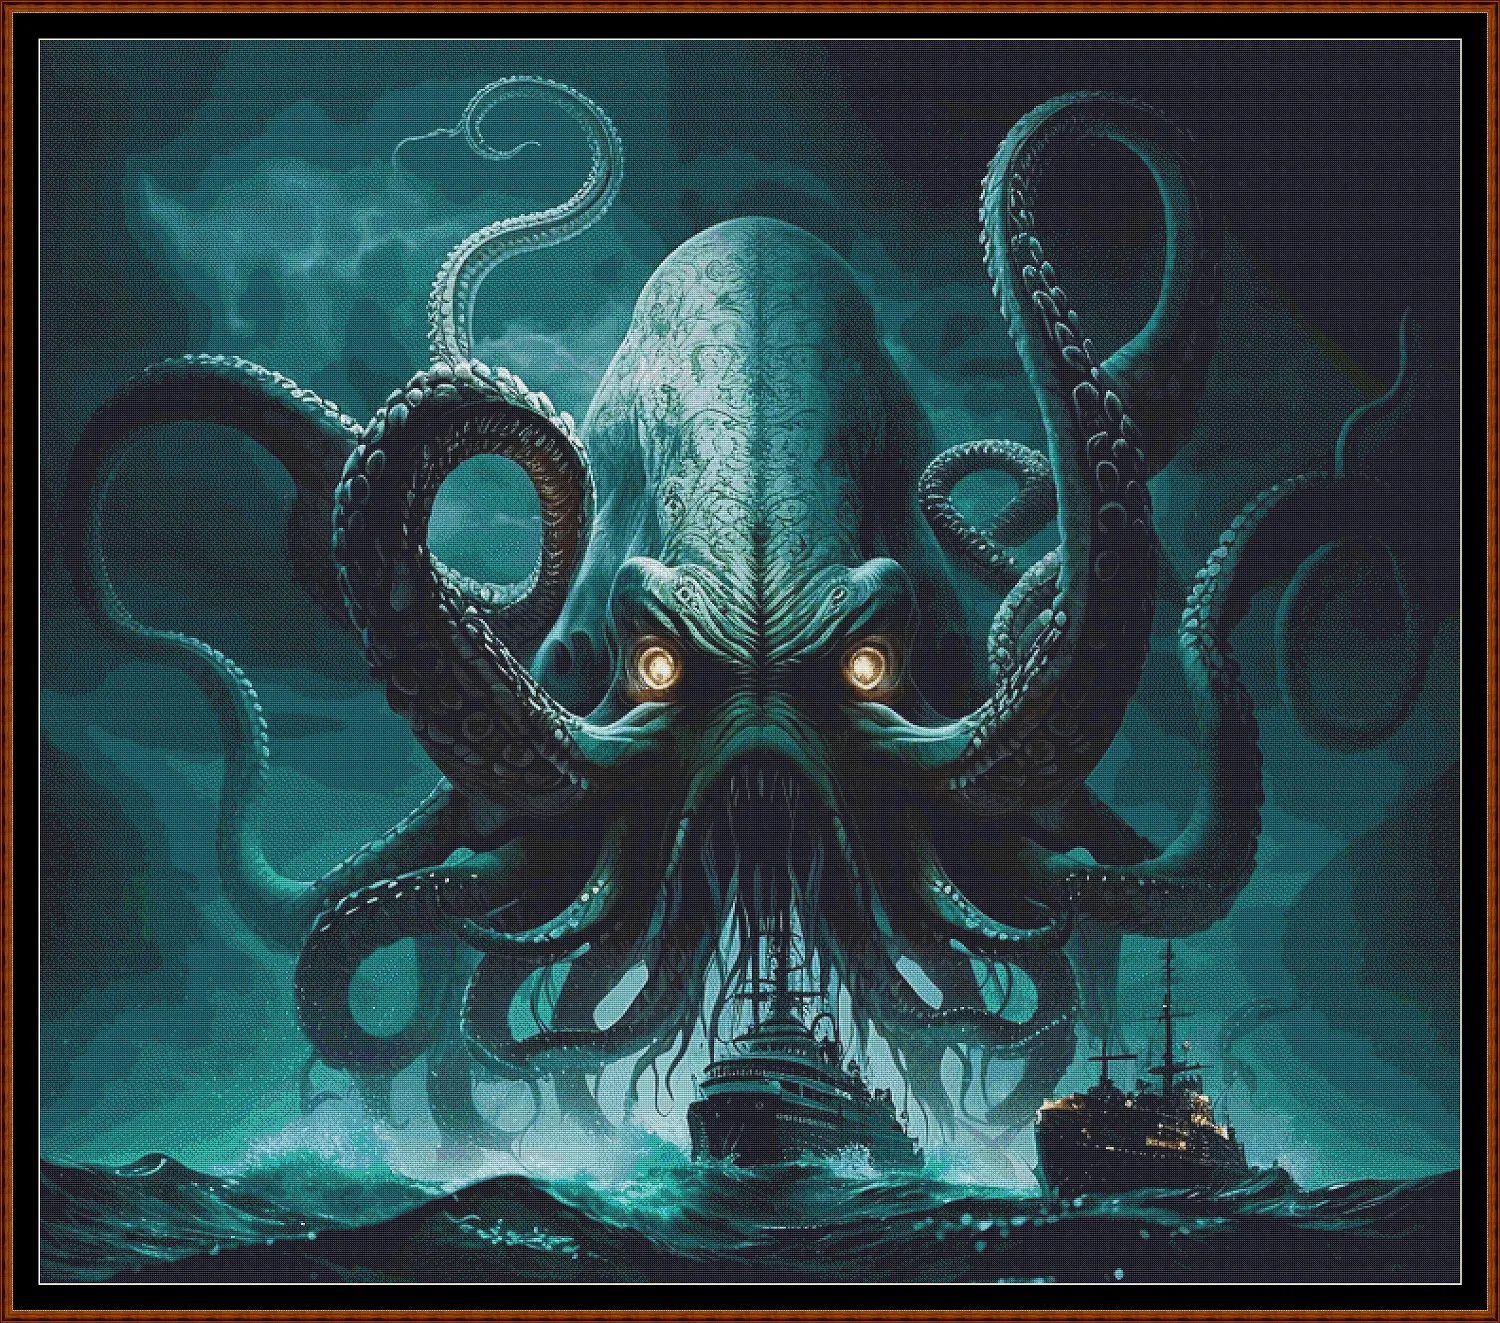 The Kraken patterns are expertly created from art by crannpic under Public Domain CC0 license